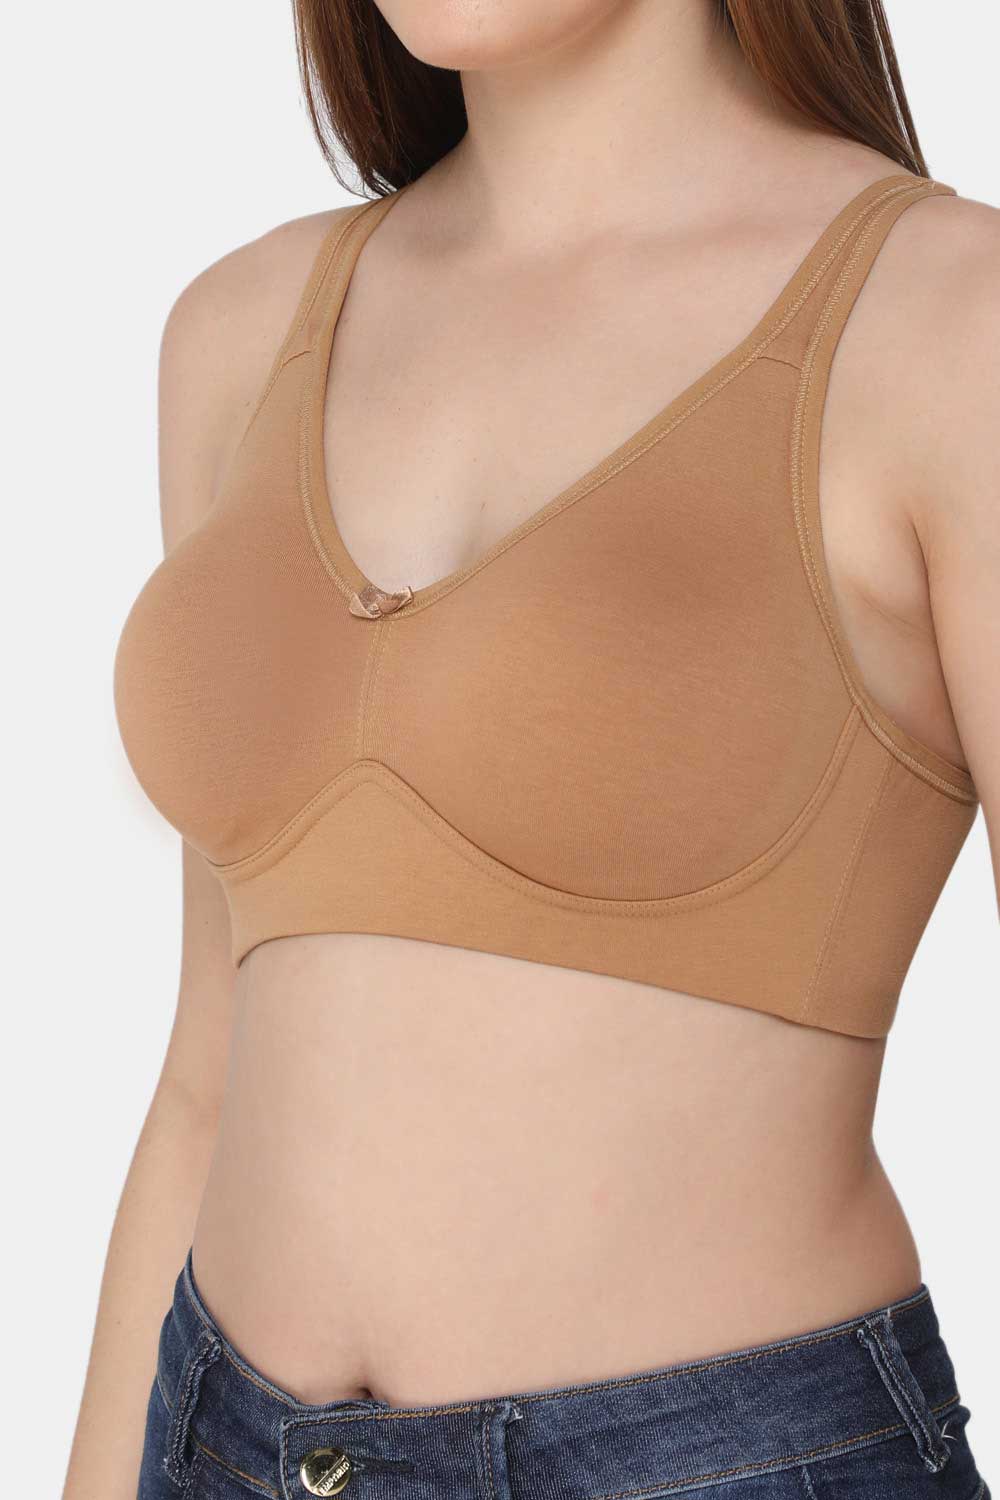 T-Shirt Bra BodyGirl Cotton Bra, Full-Coverage, Comfortable with Adjustable  Straps, Multi at Rs 46/piece in Delhi